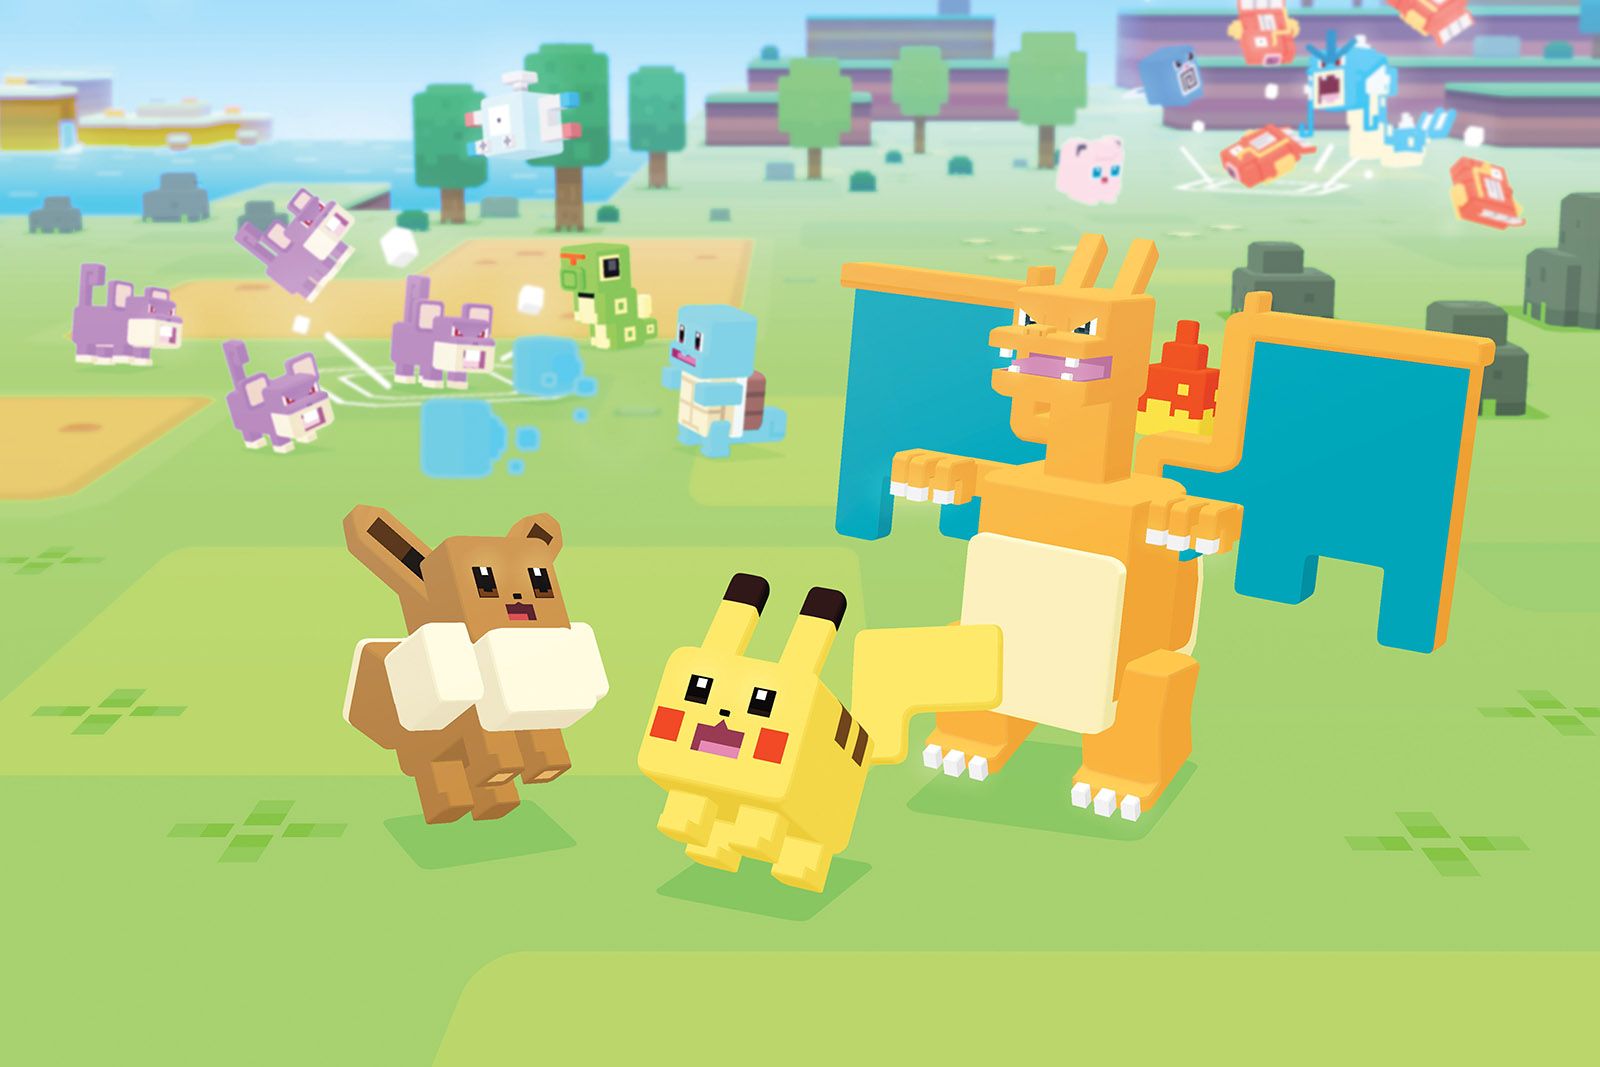 Pokemon comes to Nintendo Switch with Pokemon Quest and Pokemon Lets Go image 1